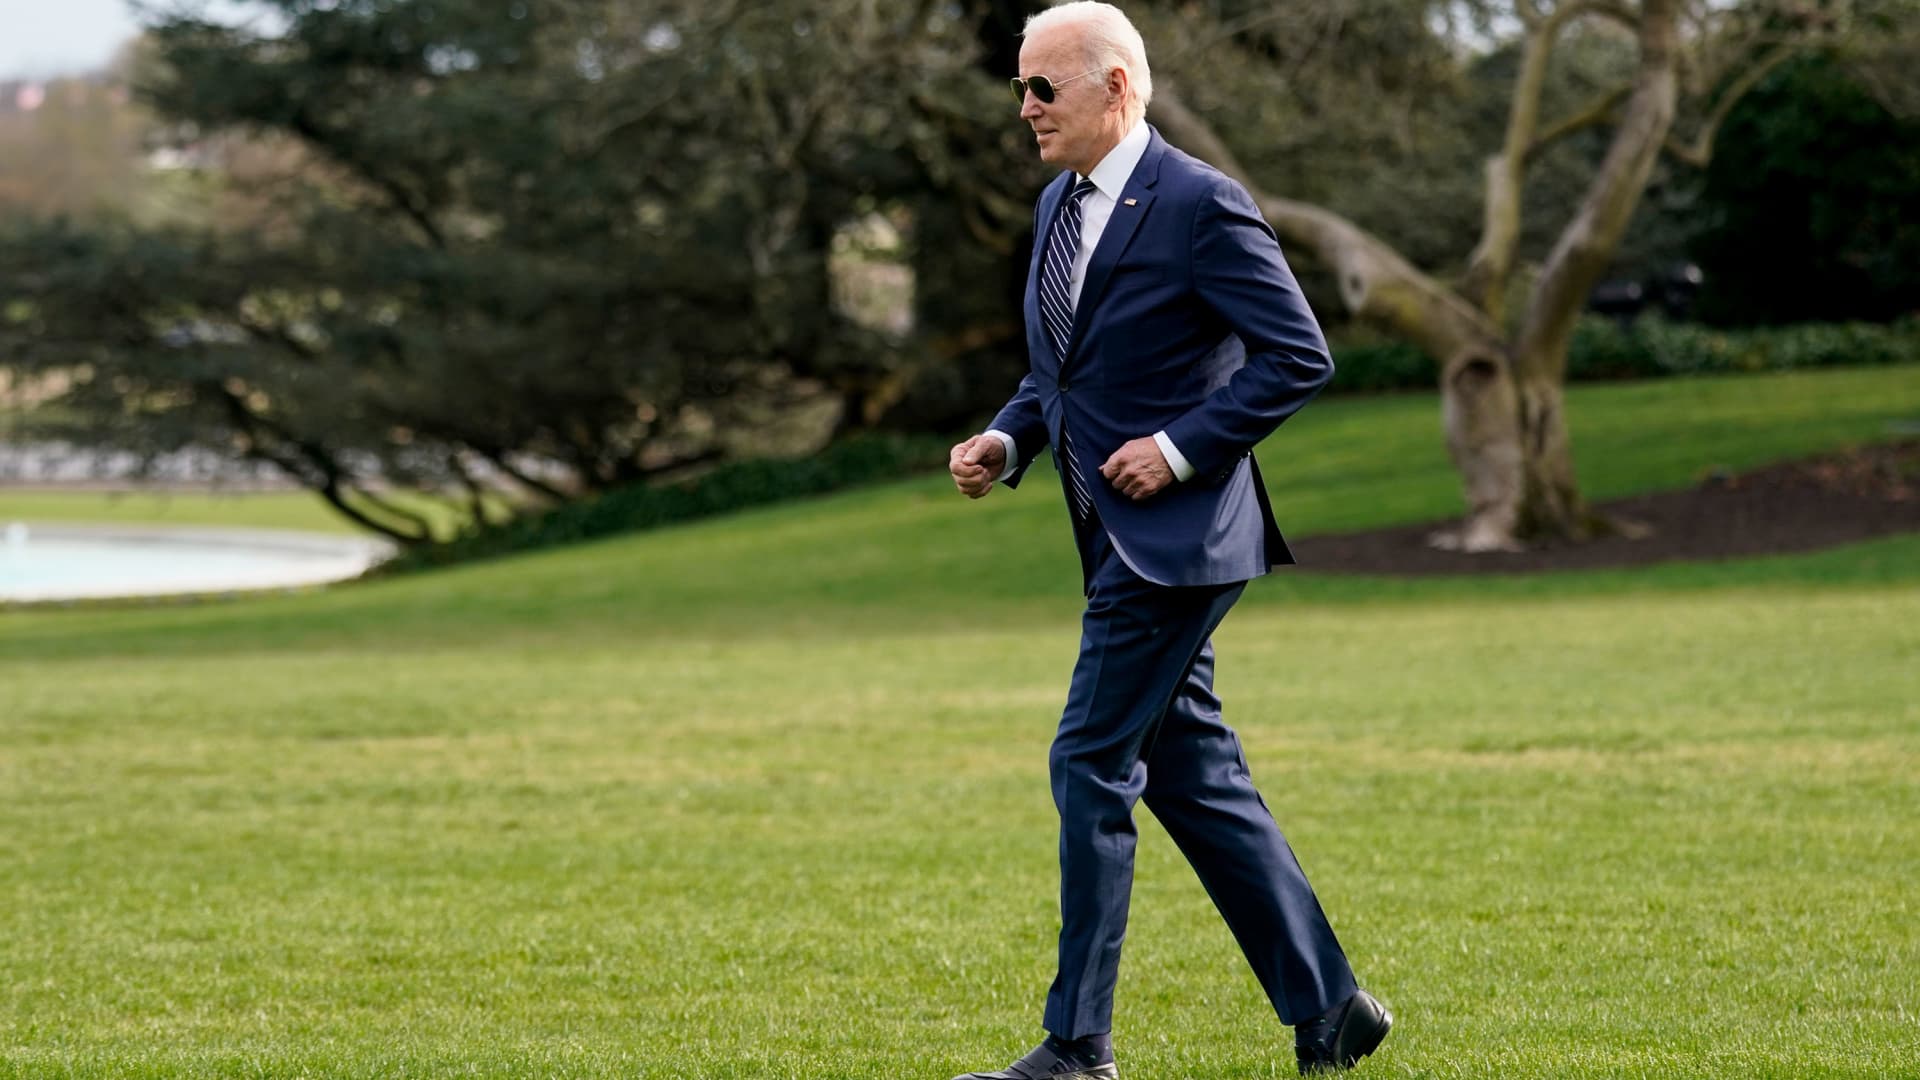 President Joe Biden jogs across the South Lawn of the White House to speak with visitors before boarding Marine One, Friday, March 18, 2022, in Washington. Biden turns 80 on Sunday, Nov. 20.